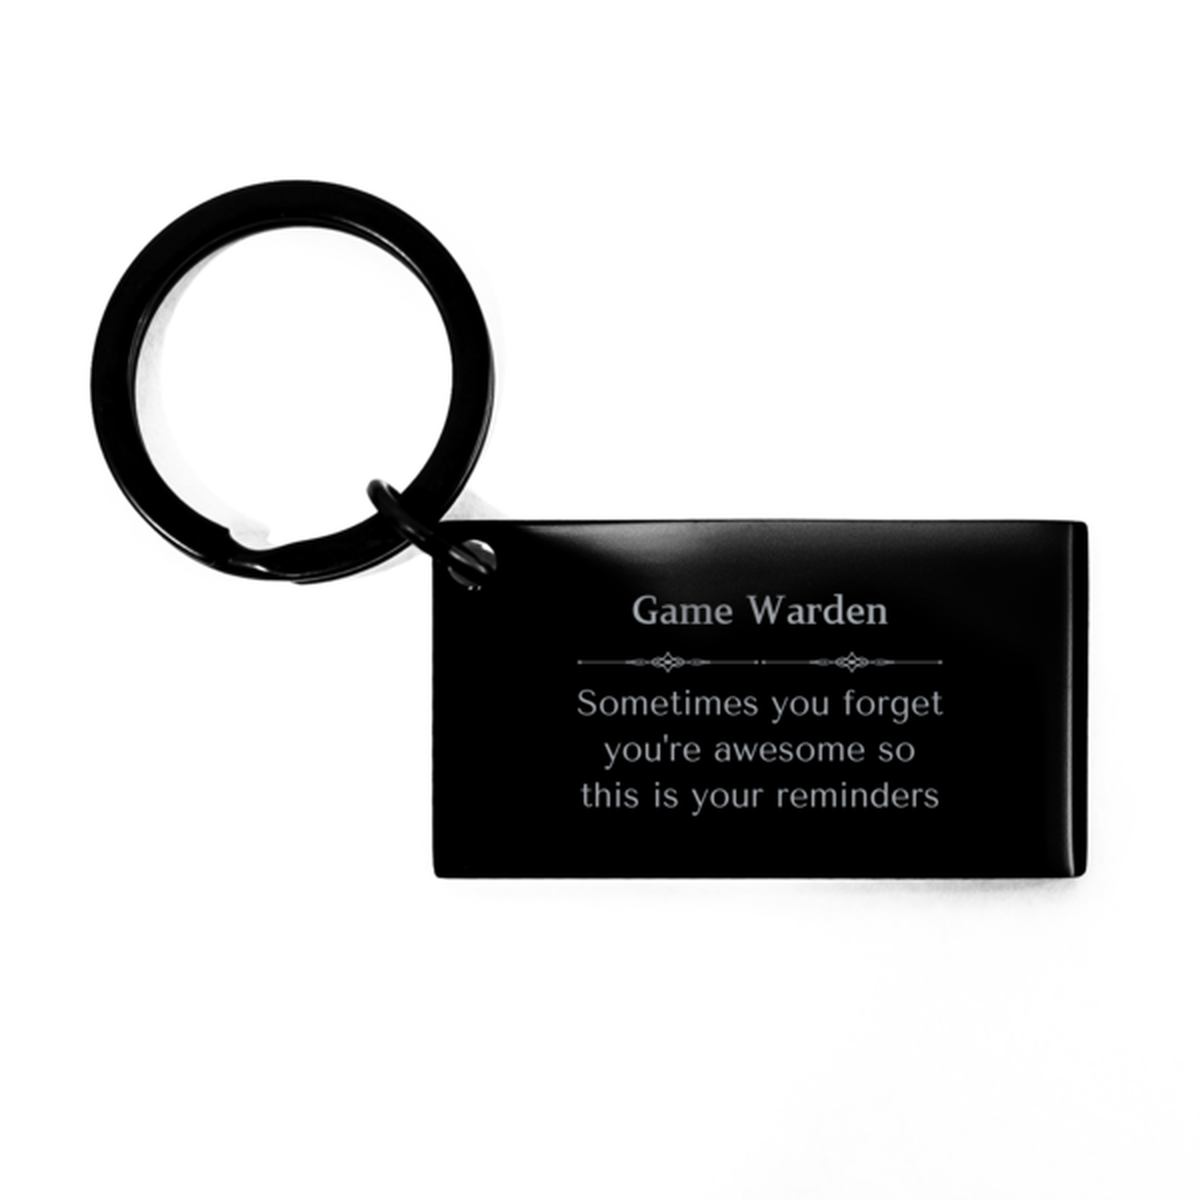 Sentimental Game Warden Keychain, Magistrate Sometimes you forget you're awesome so this is your reminders, Graduation Christmas Birthday Gifts for Game Warden, Men, Women, Coworkers